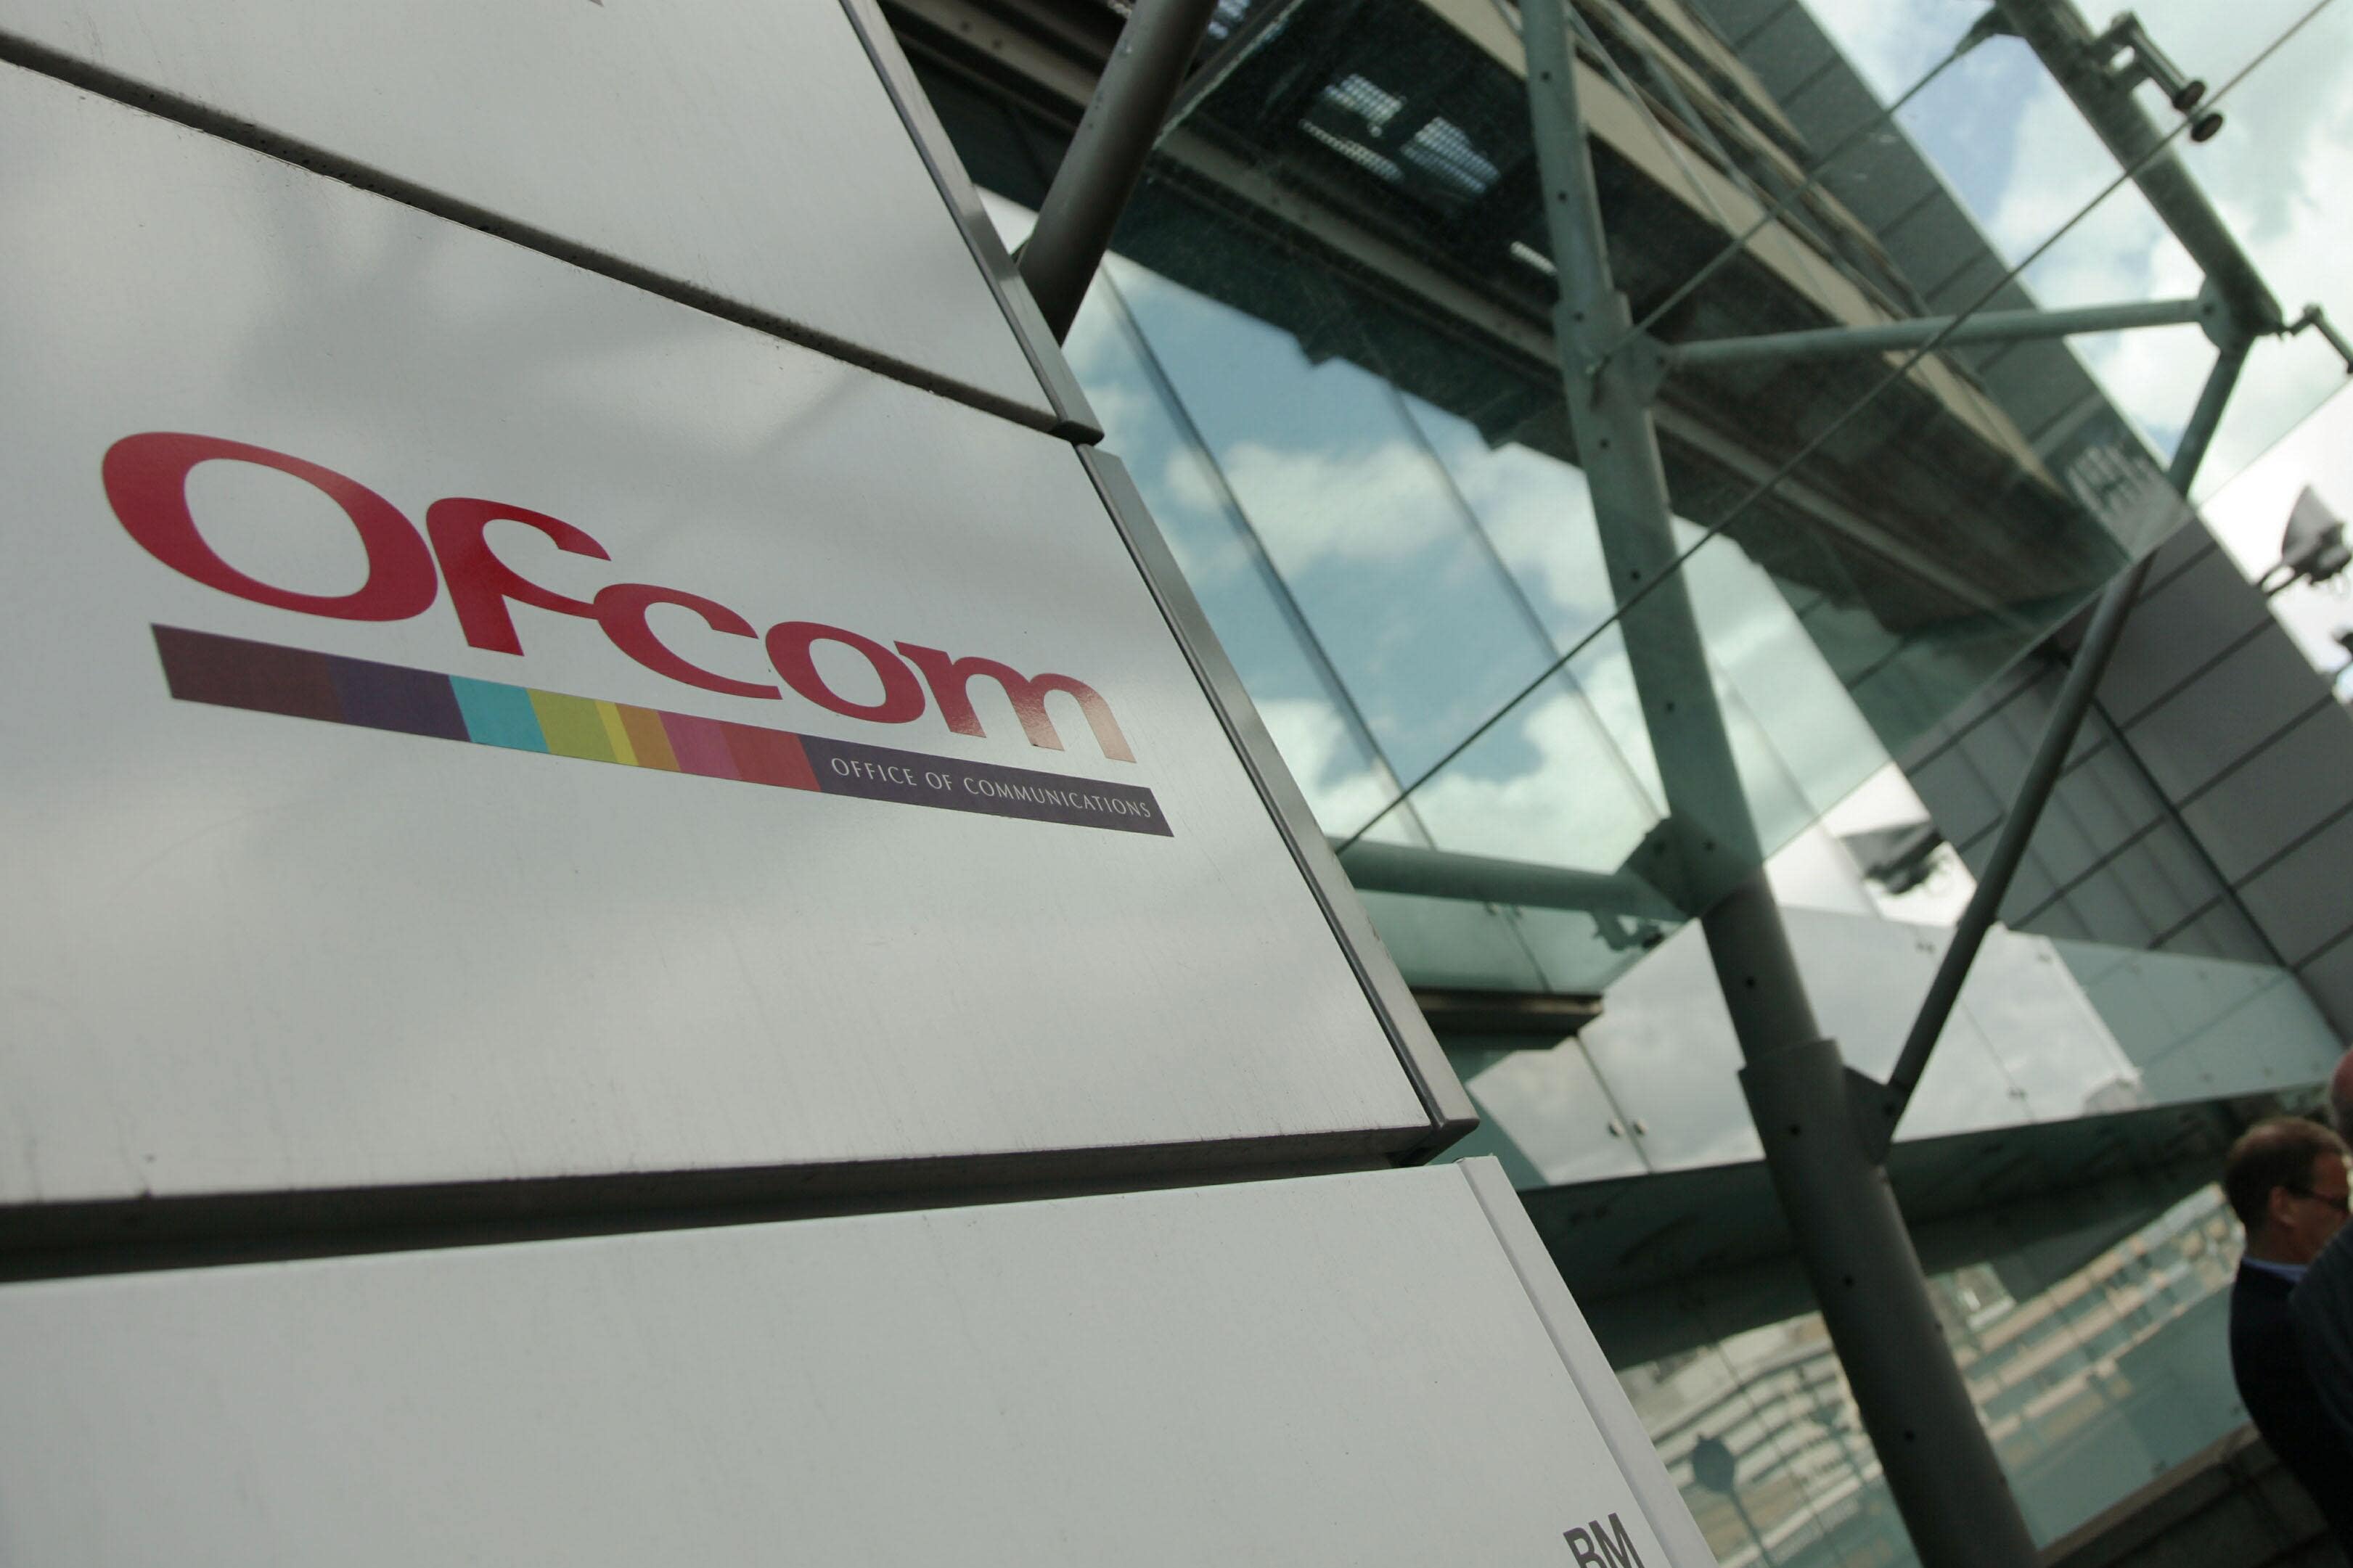 The offices of Ofcom (Office of Communications) in Southwark, London.